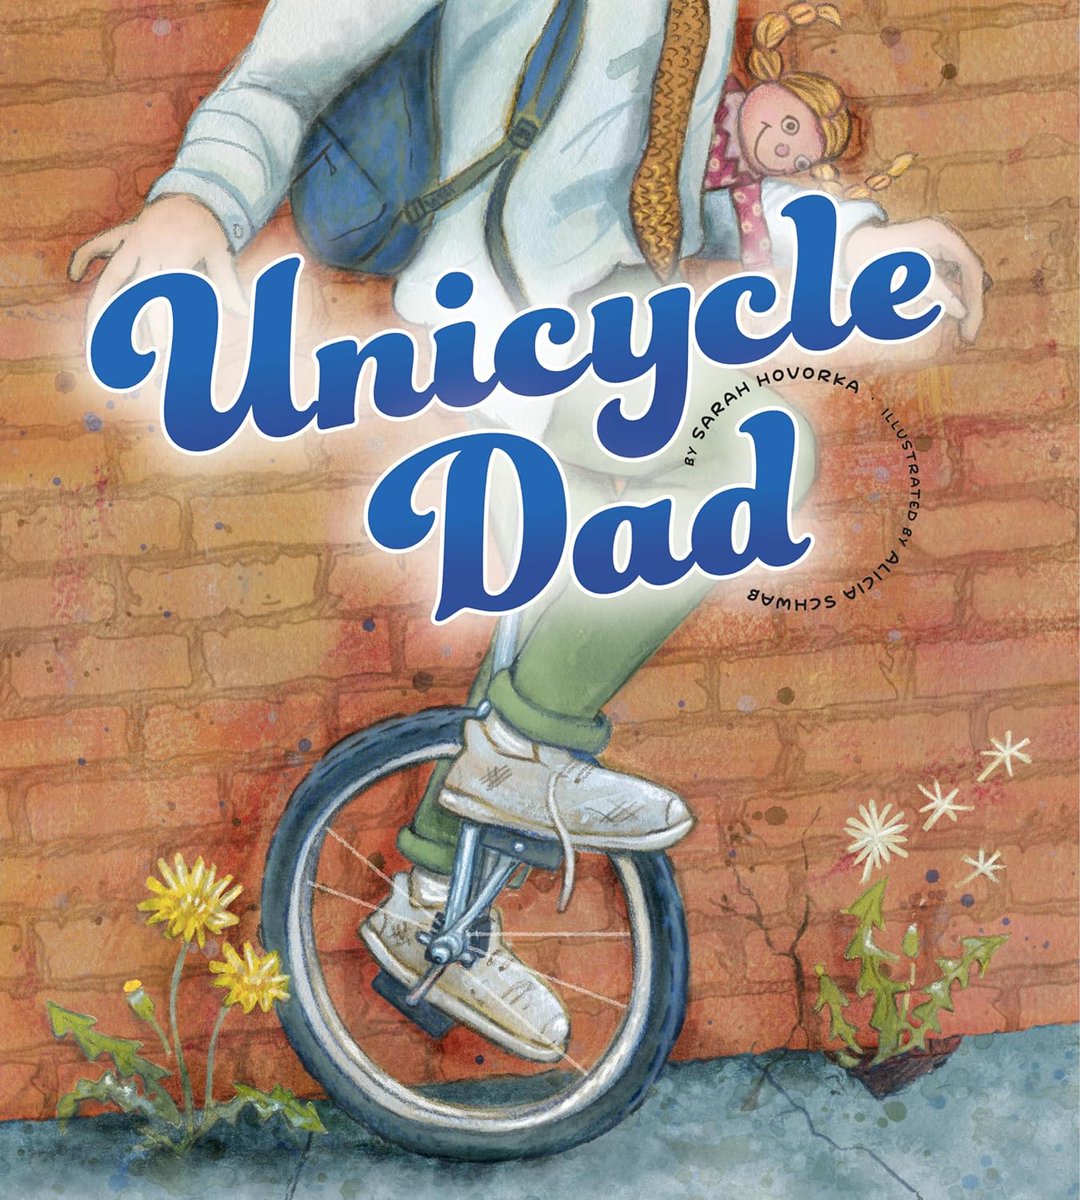 A wonderful ode to families and single dads, this #PPBF book, based on real life, is a heartfelt exploration of the value of dreams and perseverance. mariacmarshall.com/single-post/un… @HovorkaSarah @aschwabart @amicuspub #kidlit